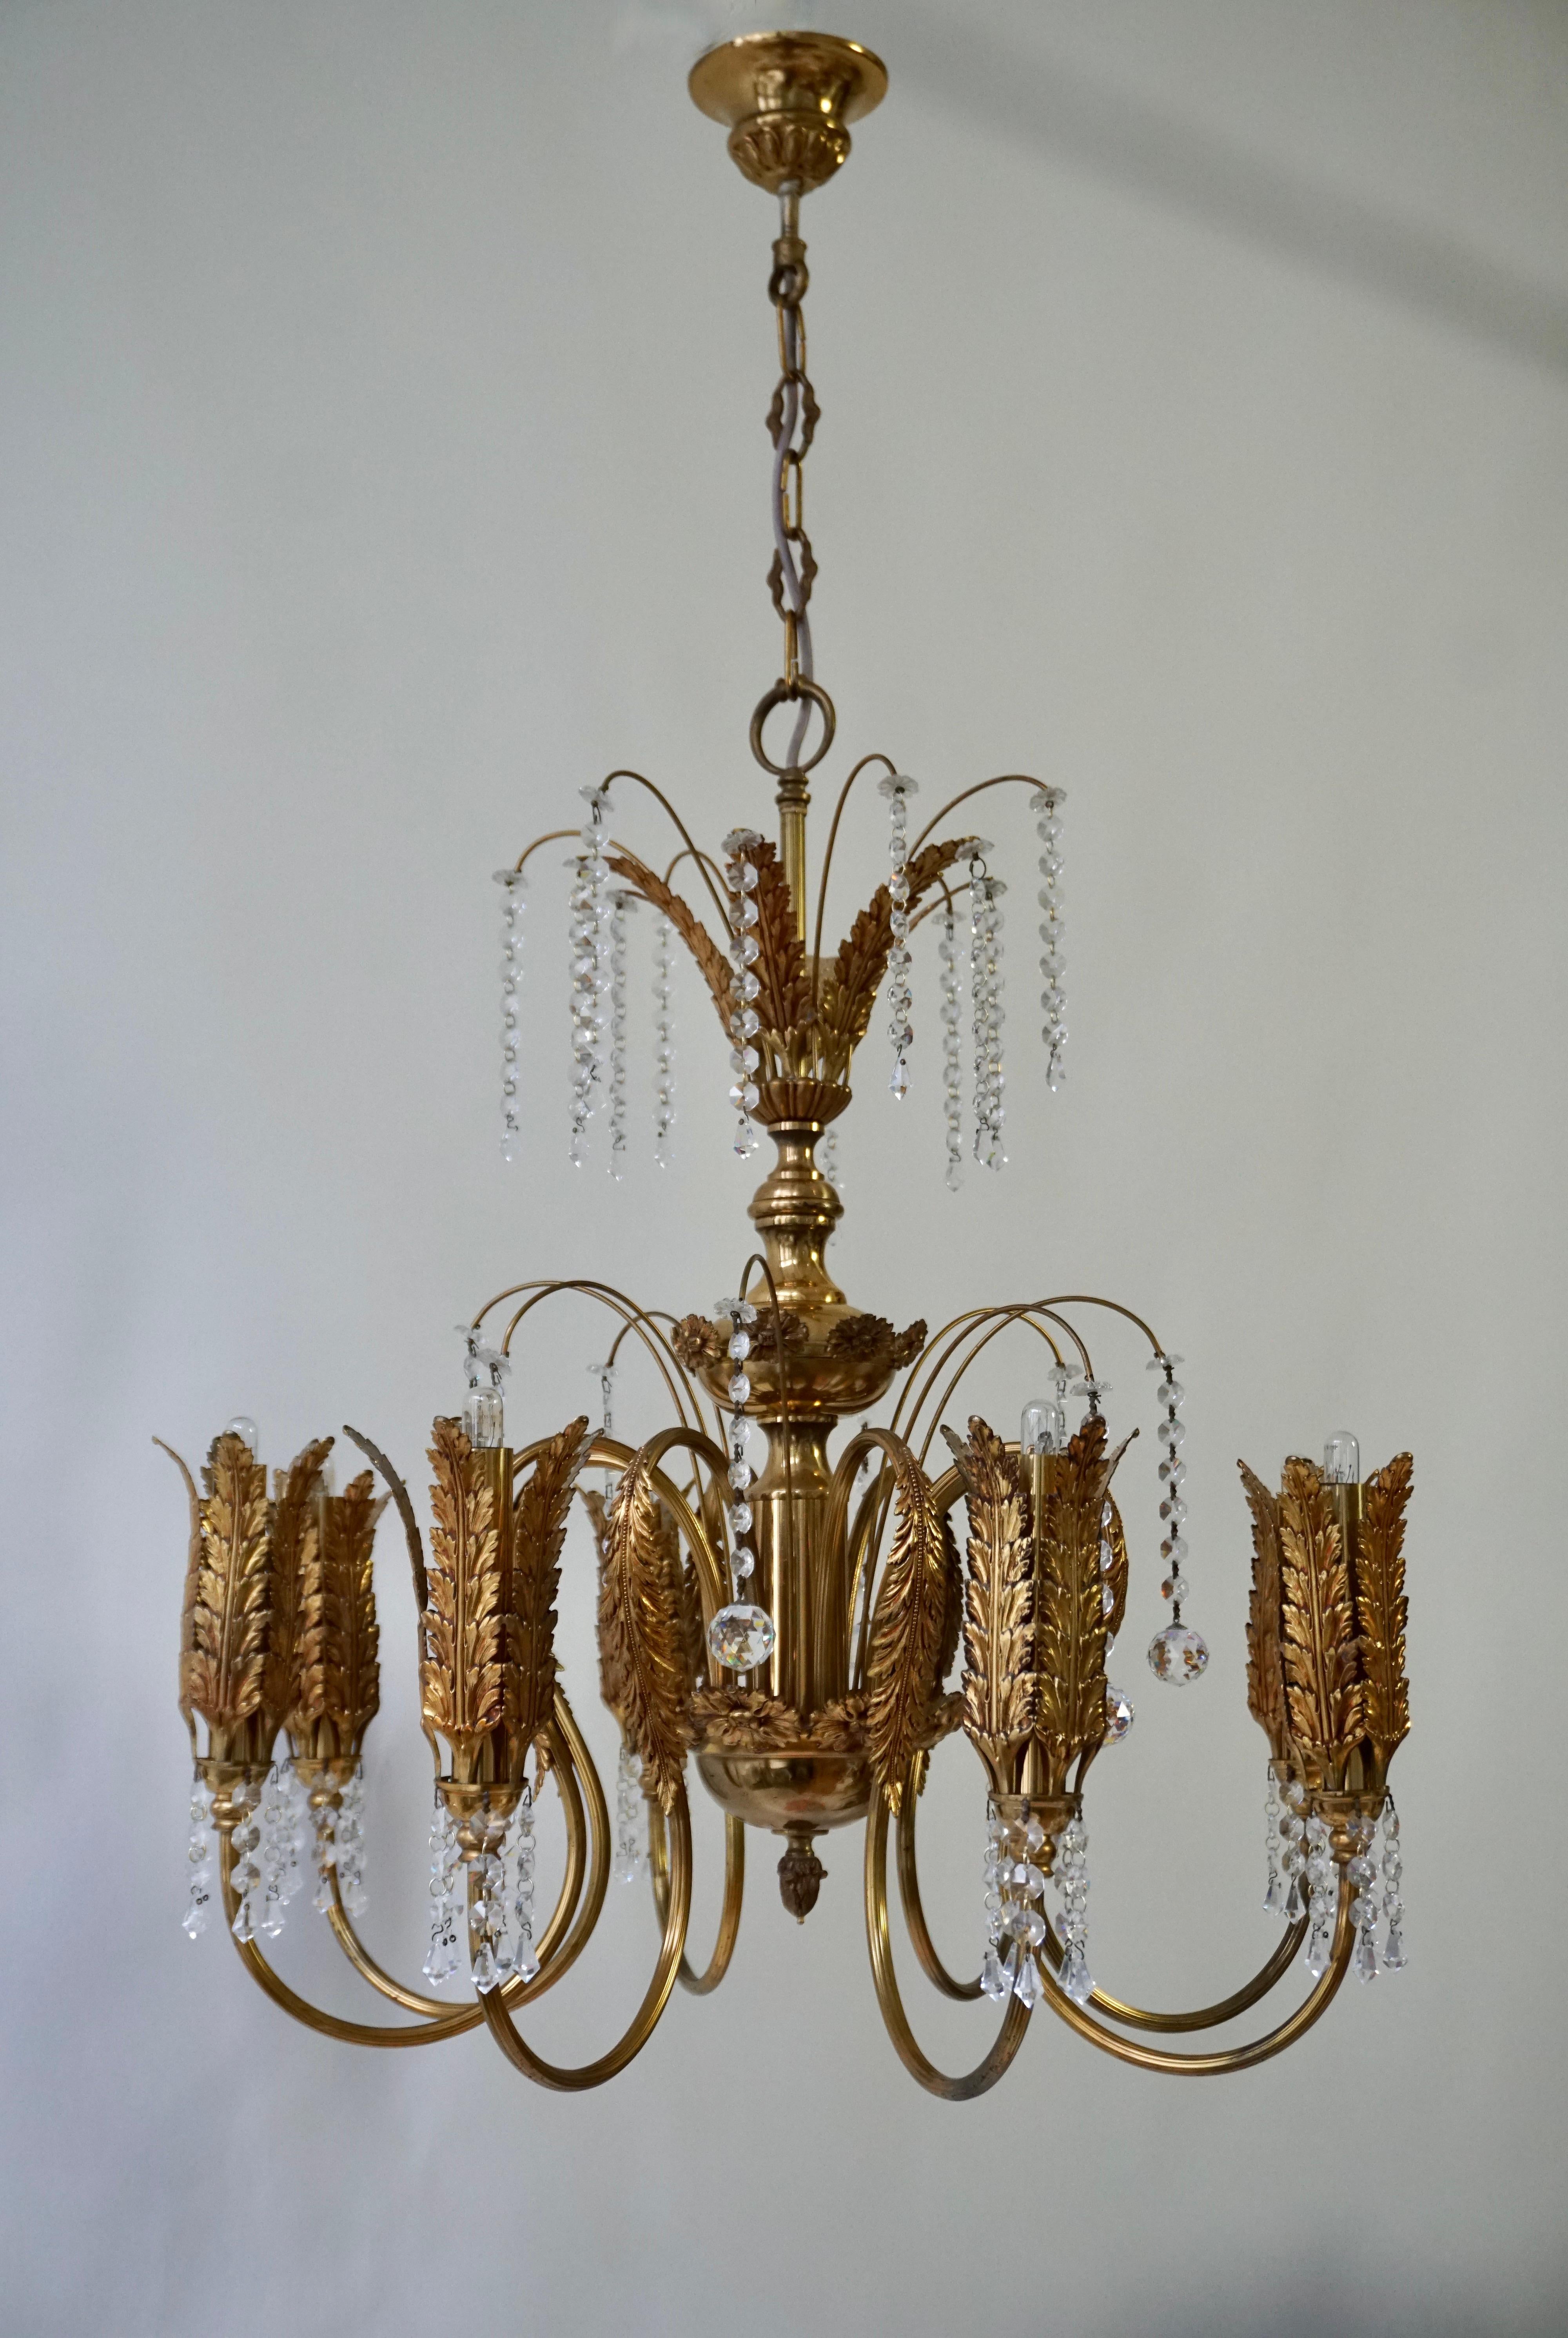  A opulent, gilt metal, Hollywood Regency chandelier. The finish has a rich, gleaming tone, and the unique shape changes from various points of view. Palm leaves sprout from the column and bottom ball and the end of each arm.
The chandelier is